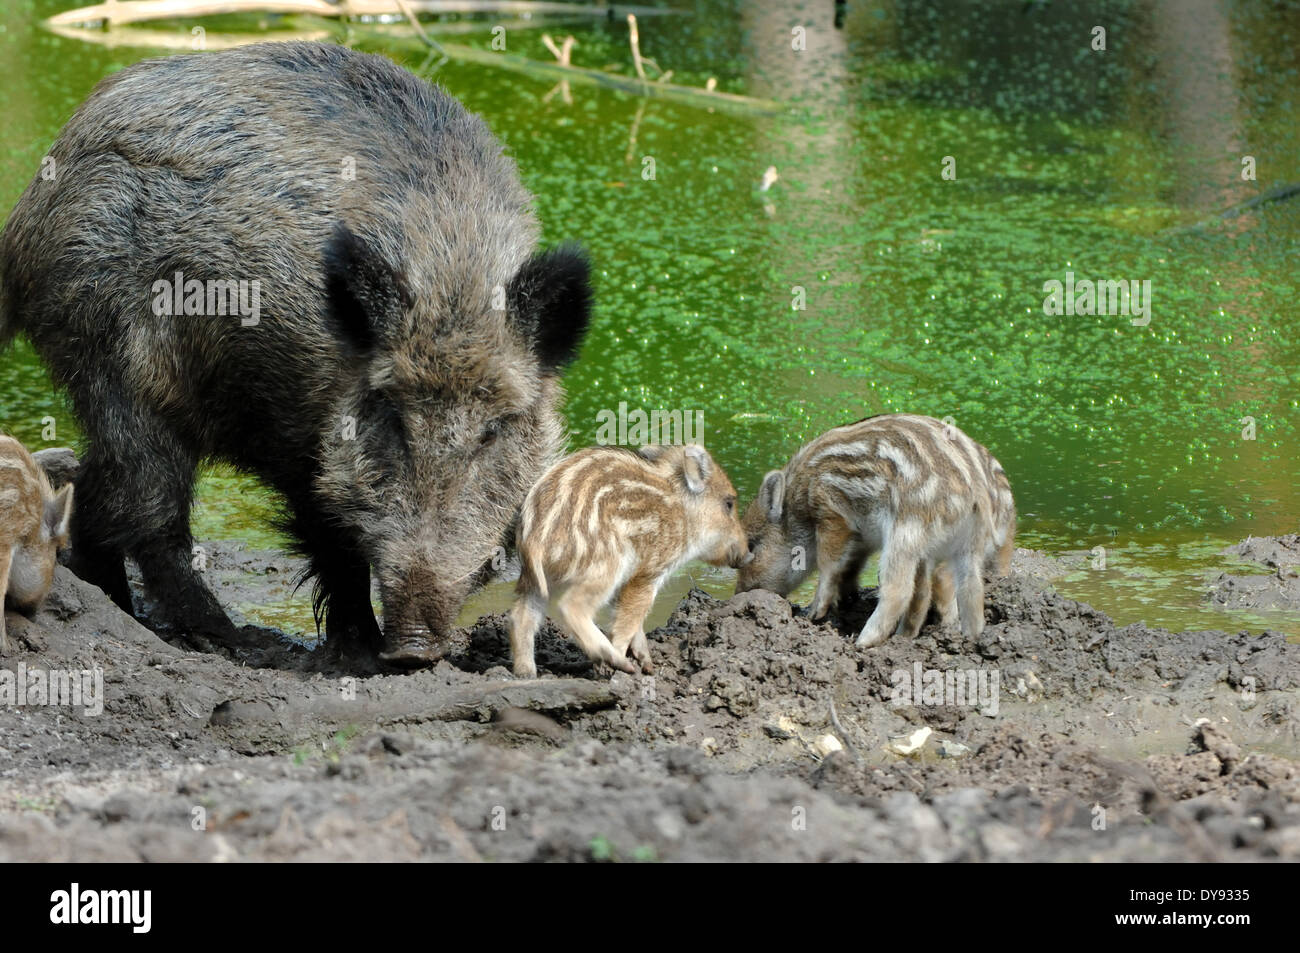 Wild boar Sus scrofa scrofa sow sows wild boars cloven-hoofed animal pigs pig vertebrates mammals Wallowing Wild sow animal a Stock Photo